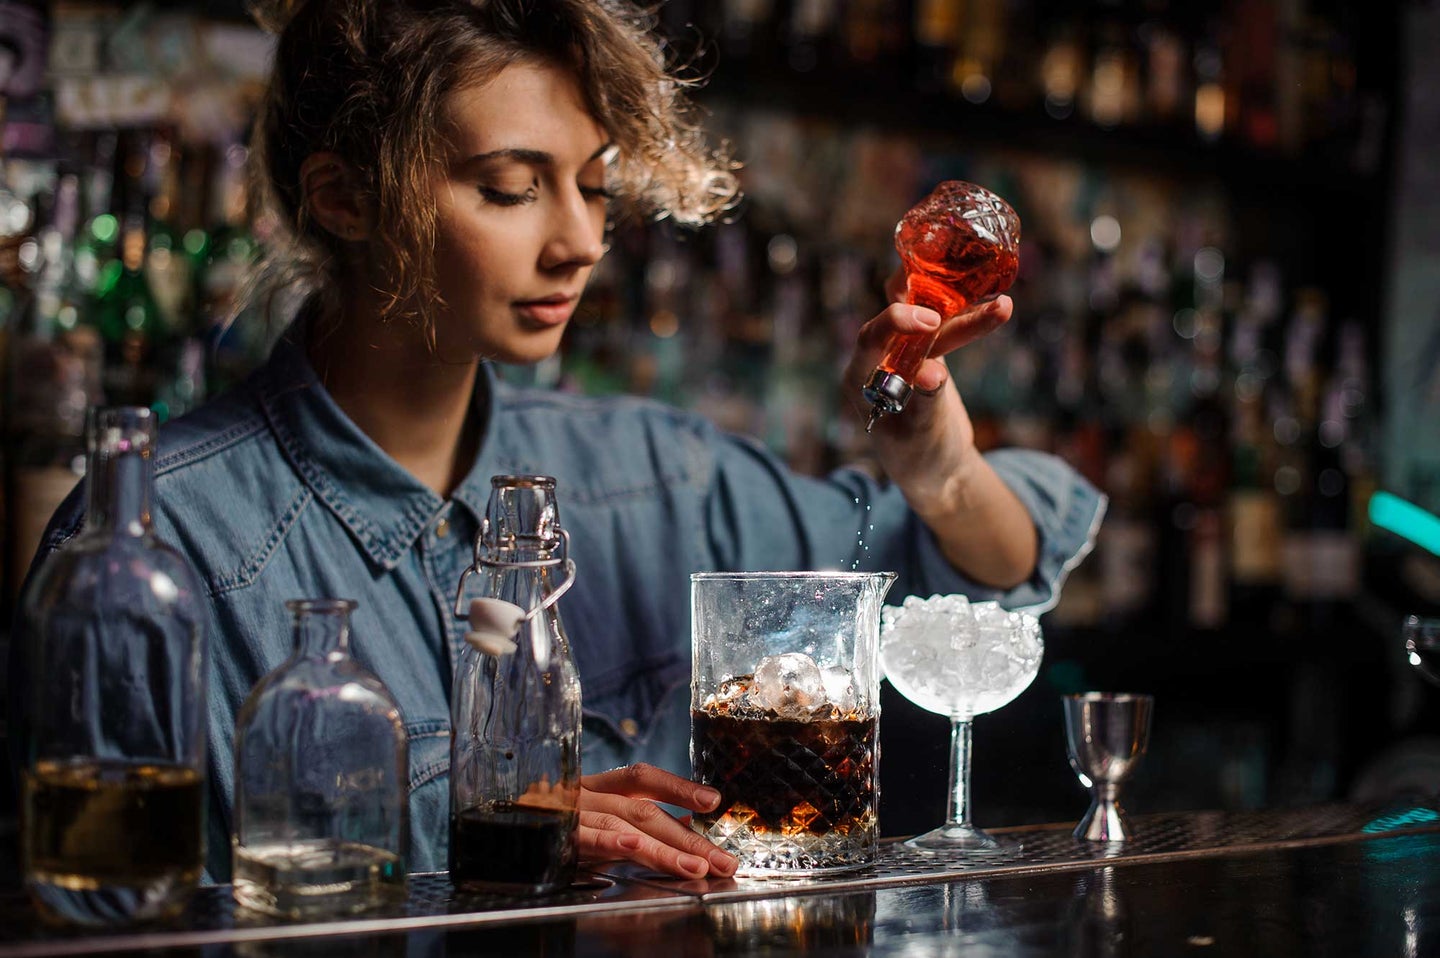 Bartending dashing bitters into a cocktail